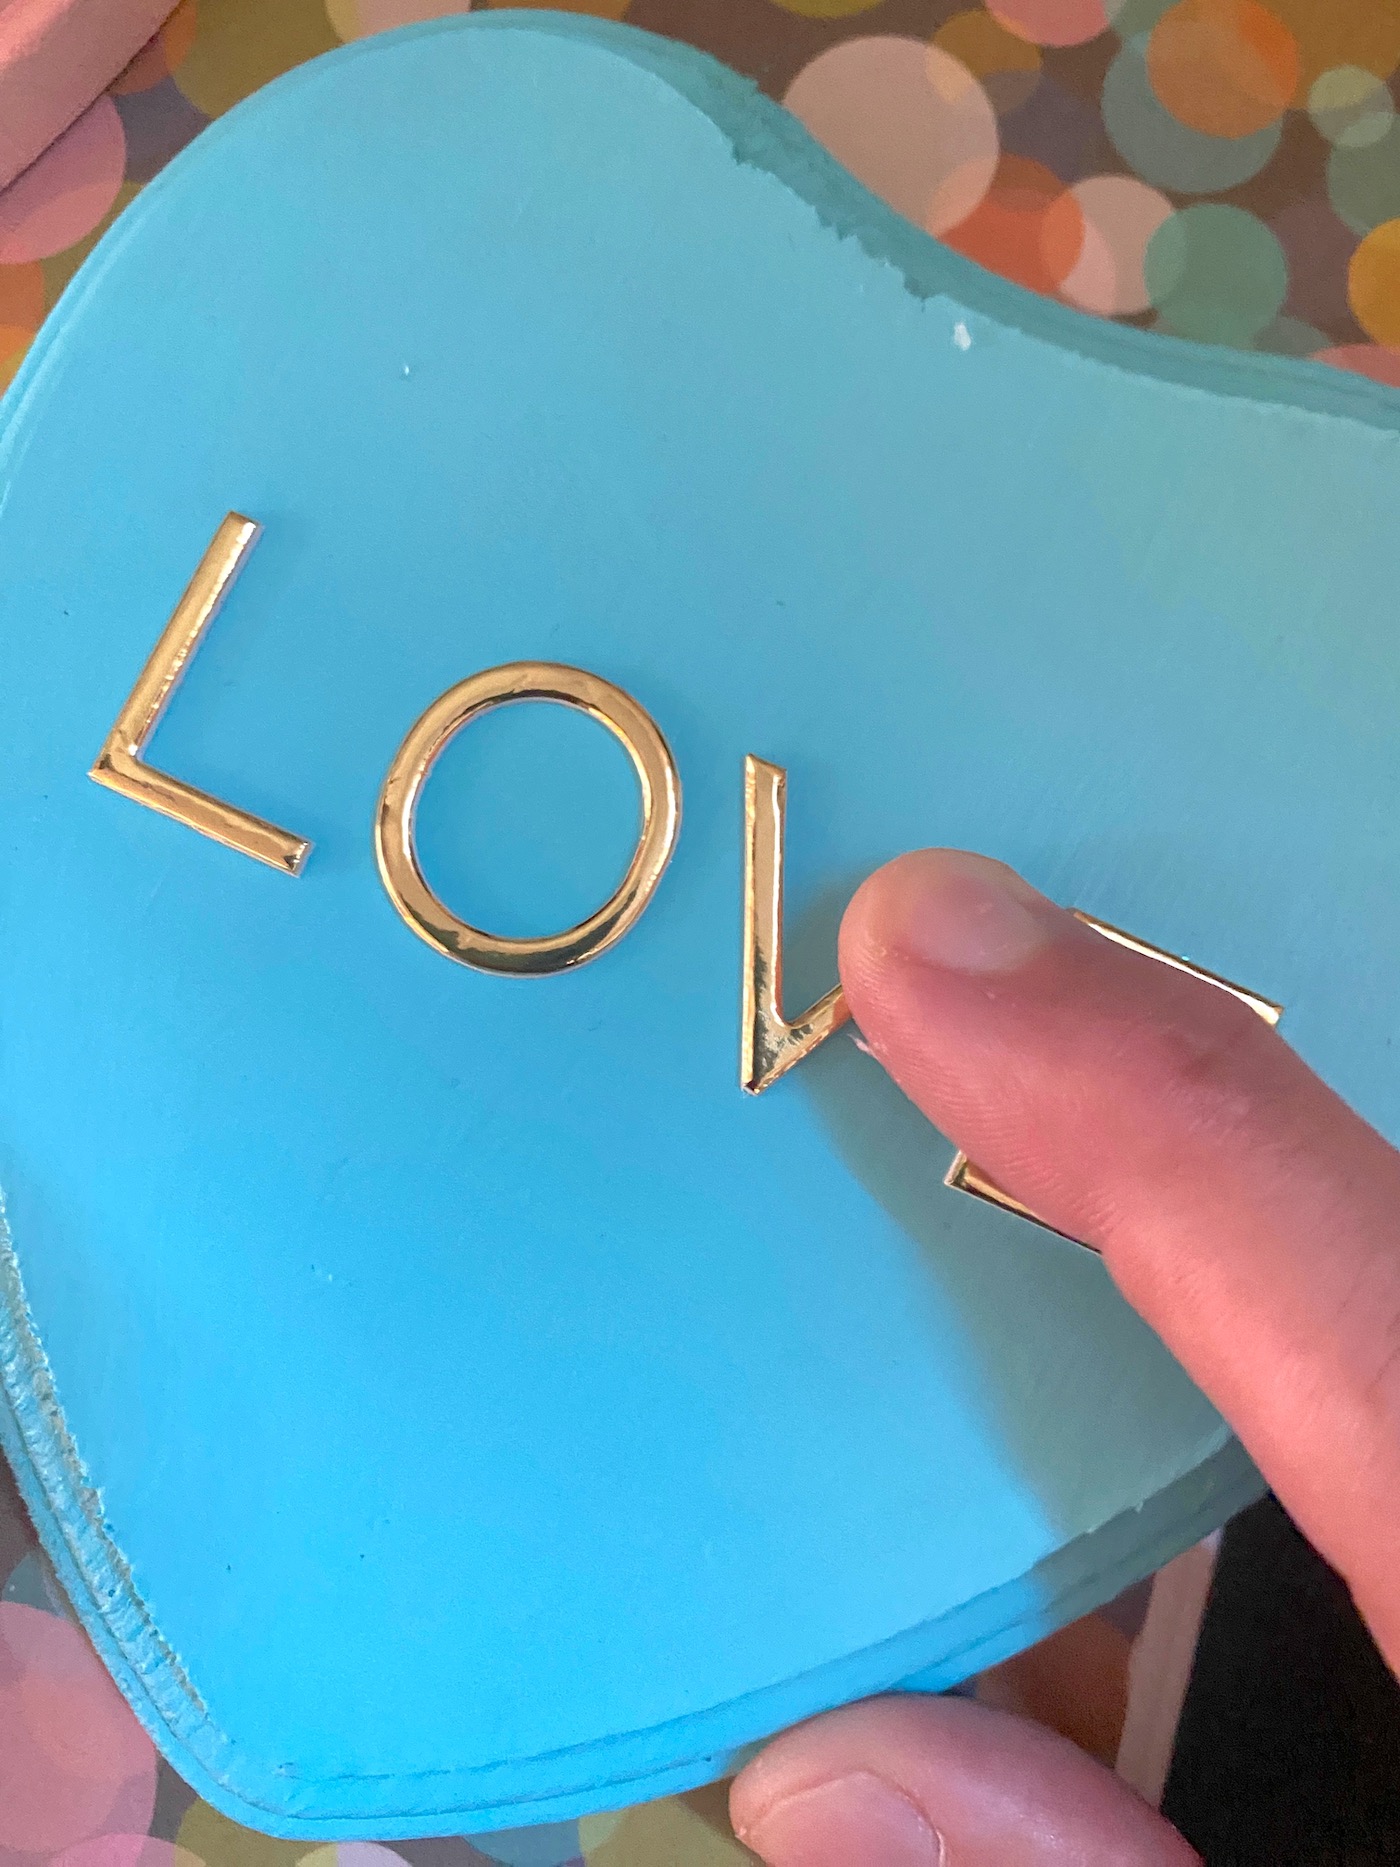 Applying gold letters to the top of the blue heart